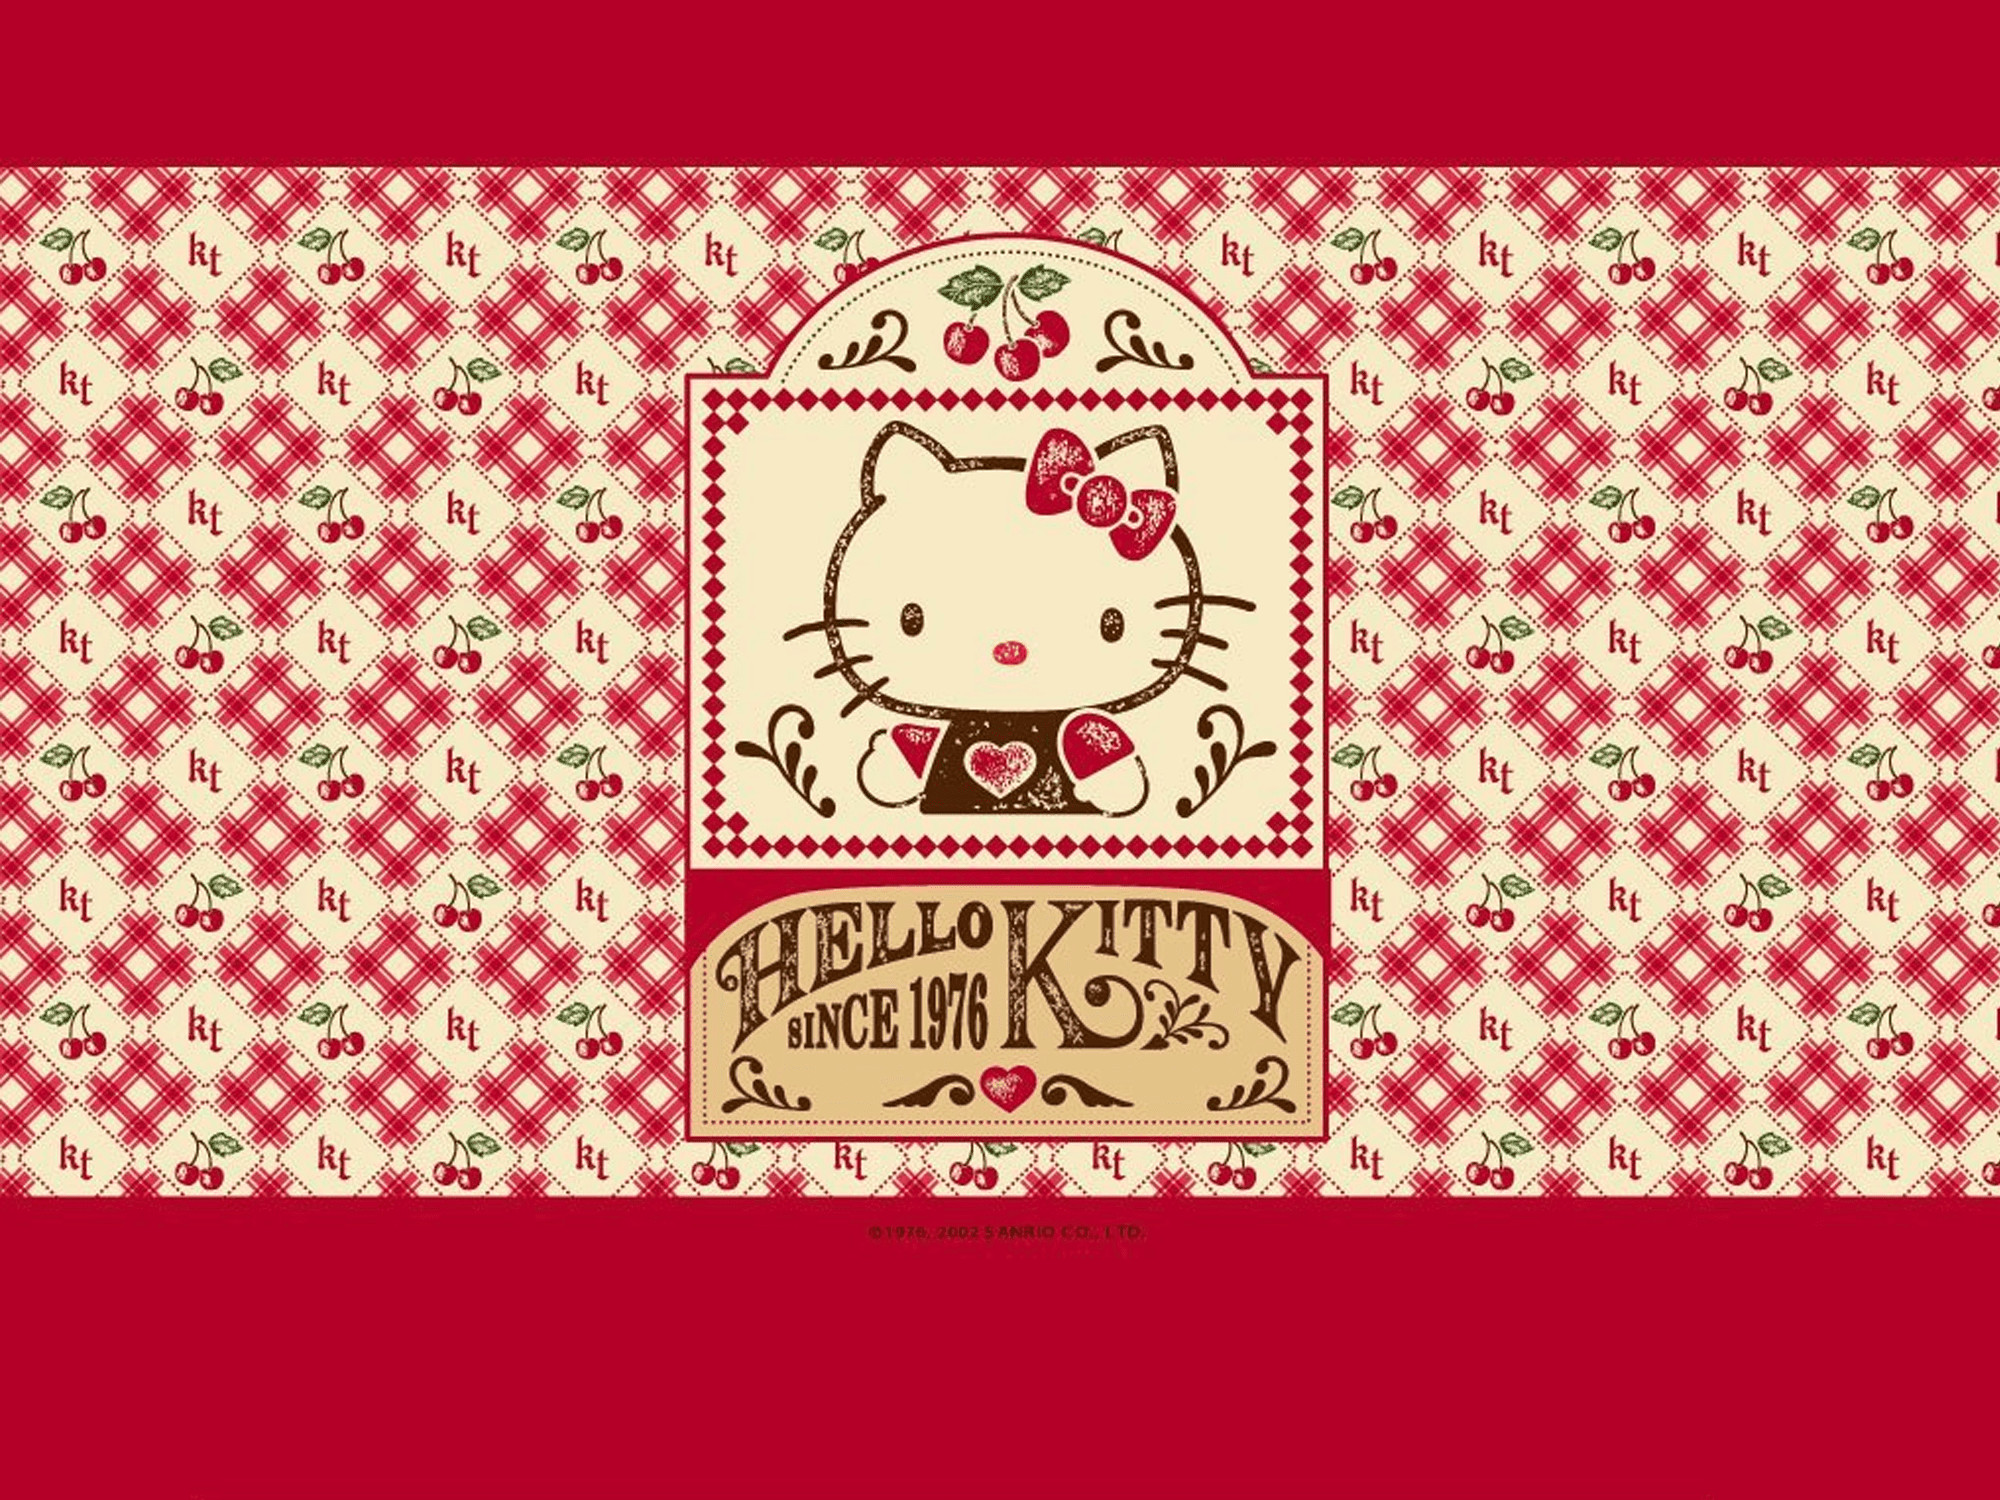 2000x1500 Screenshot of a red and brown vintage Hello Kitty wallpaper